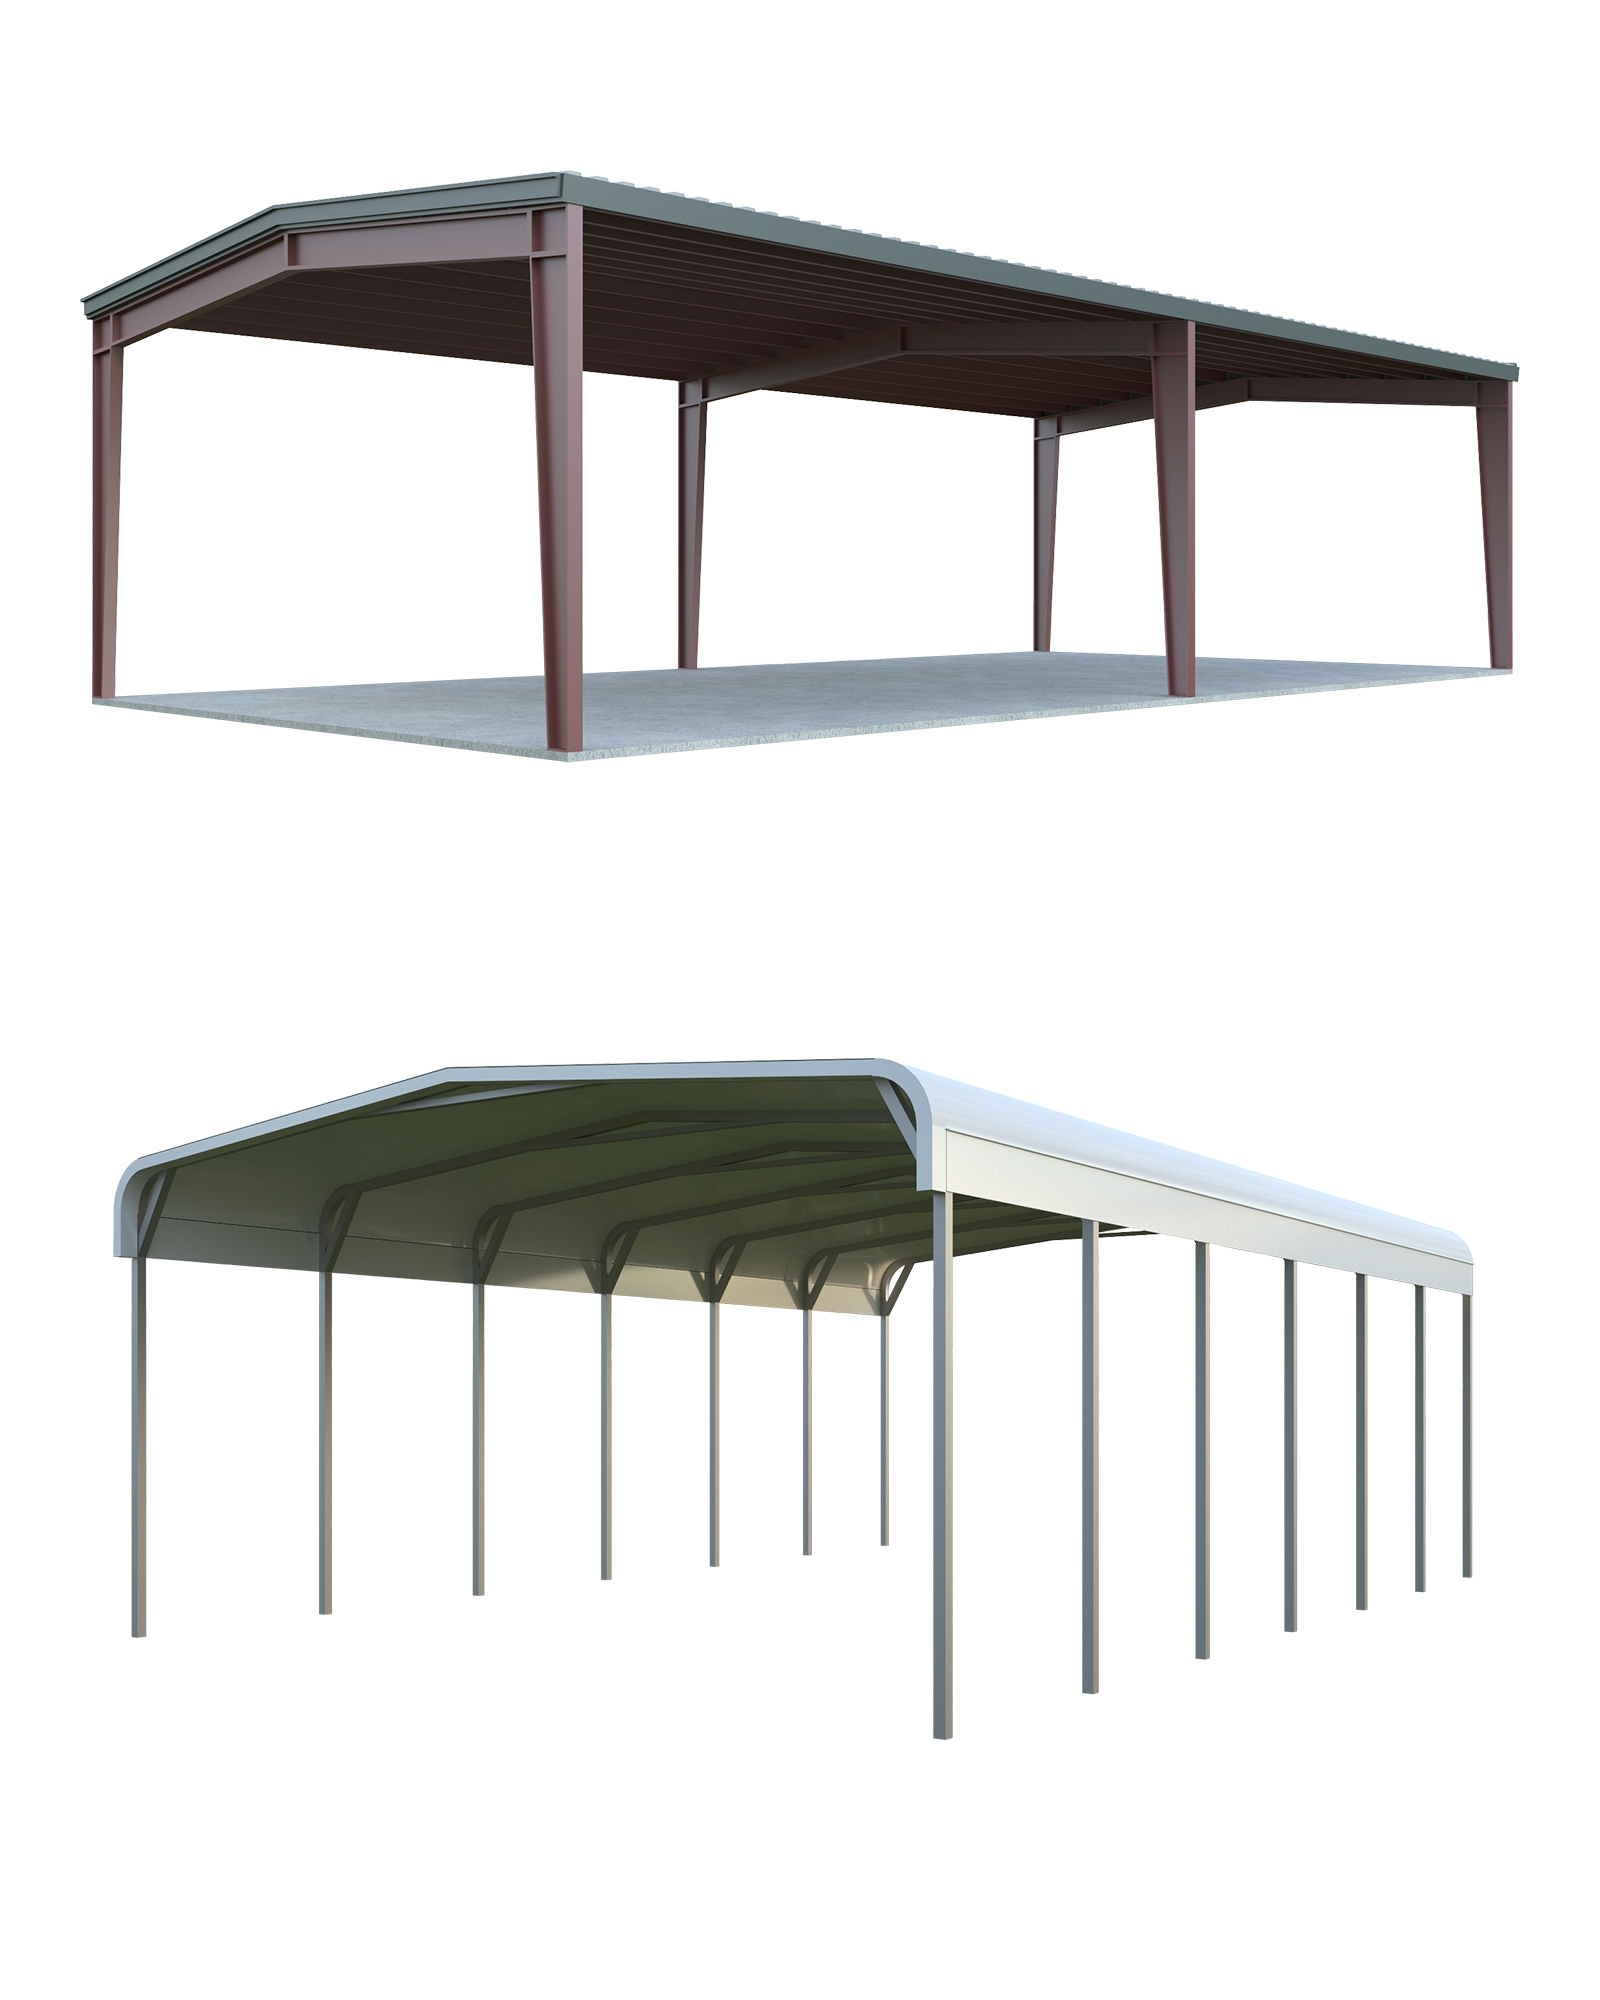 I-Beam Canopy Building vs Tube Canopy Structure